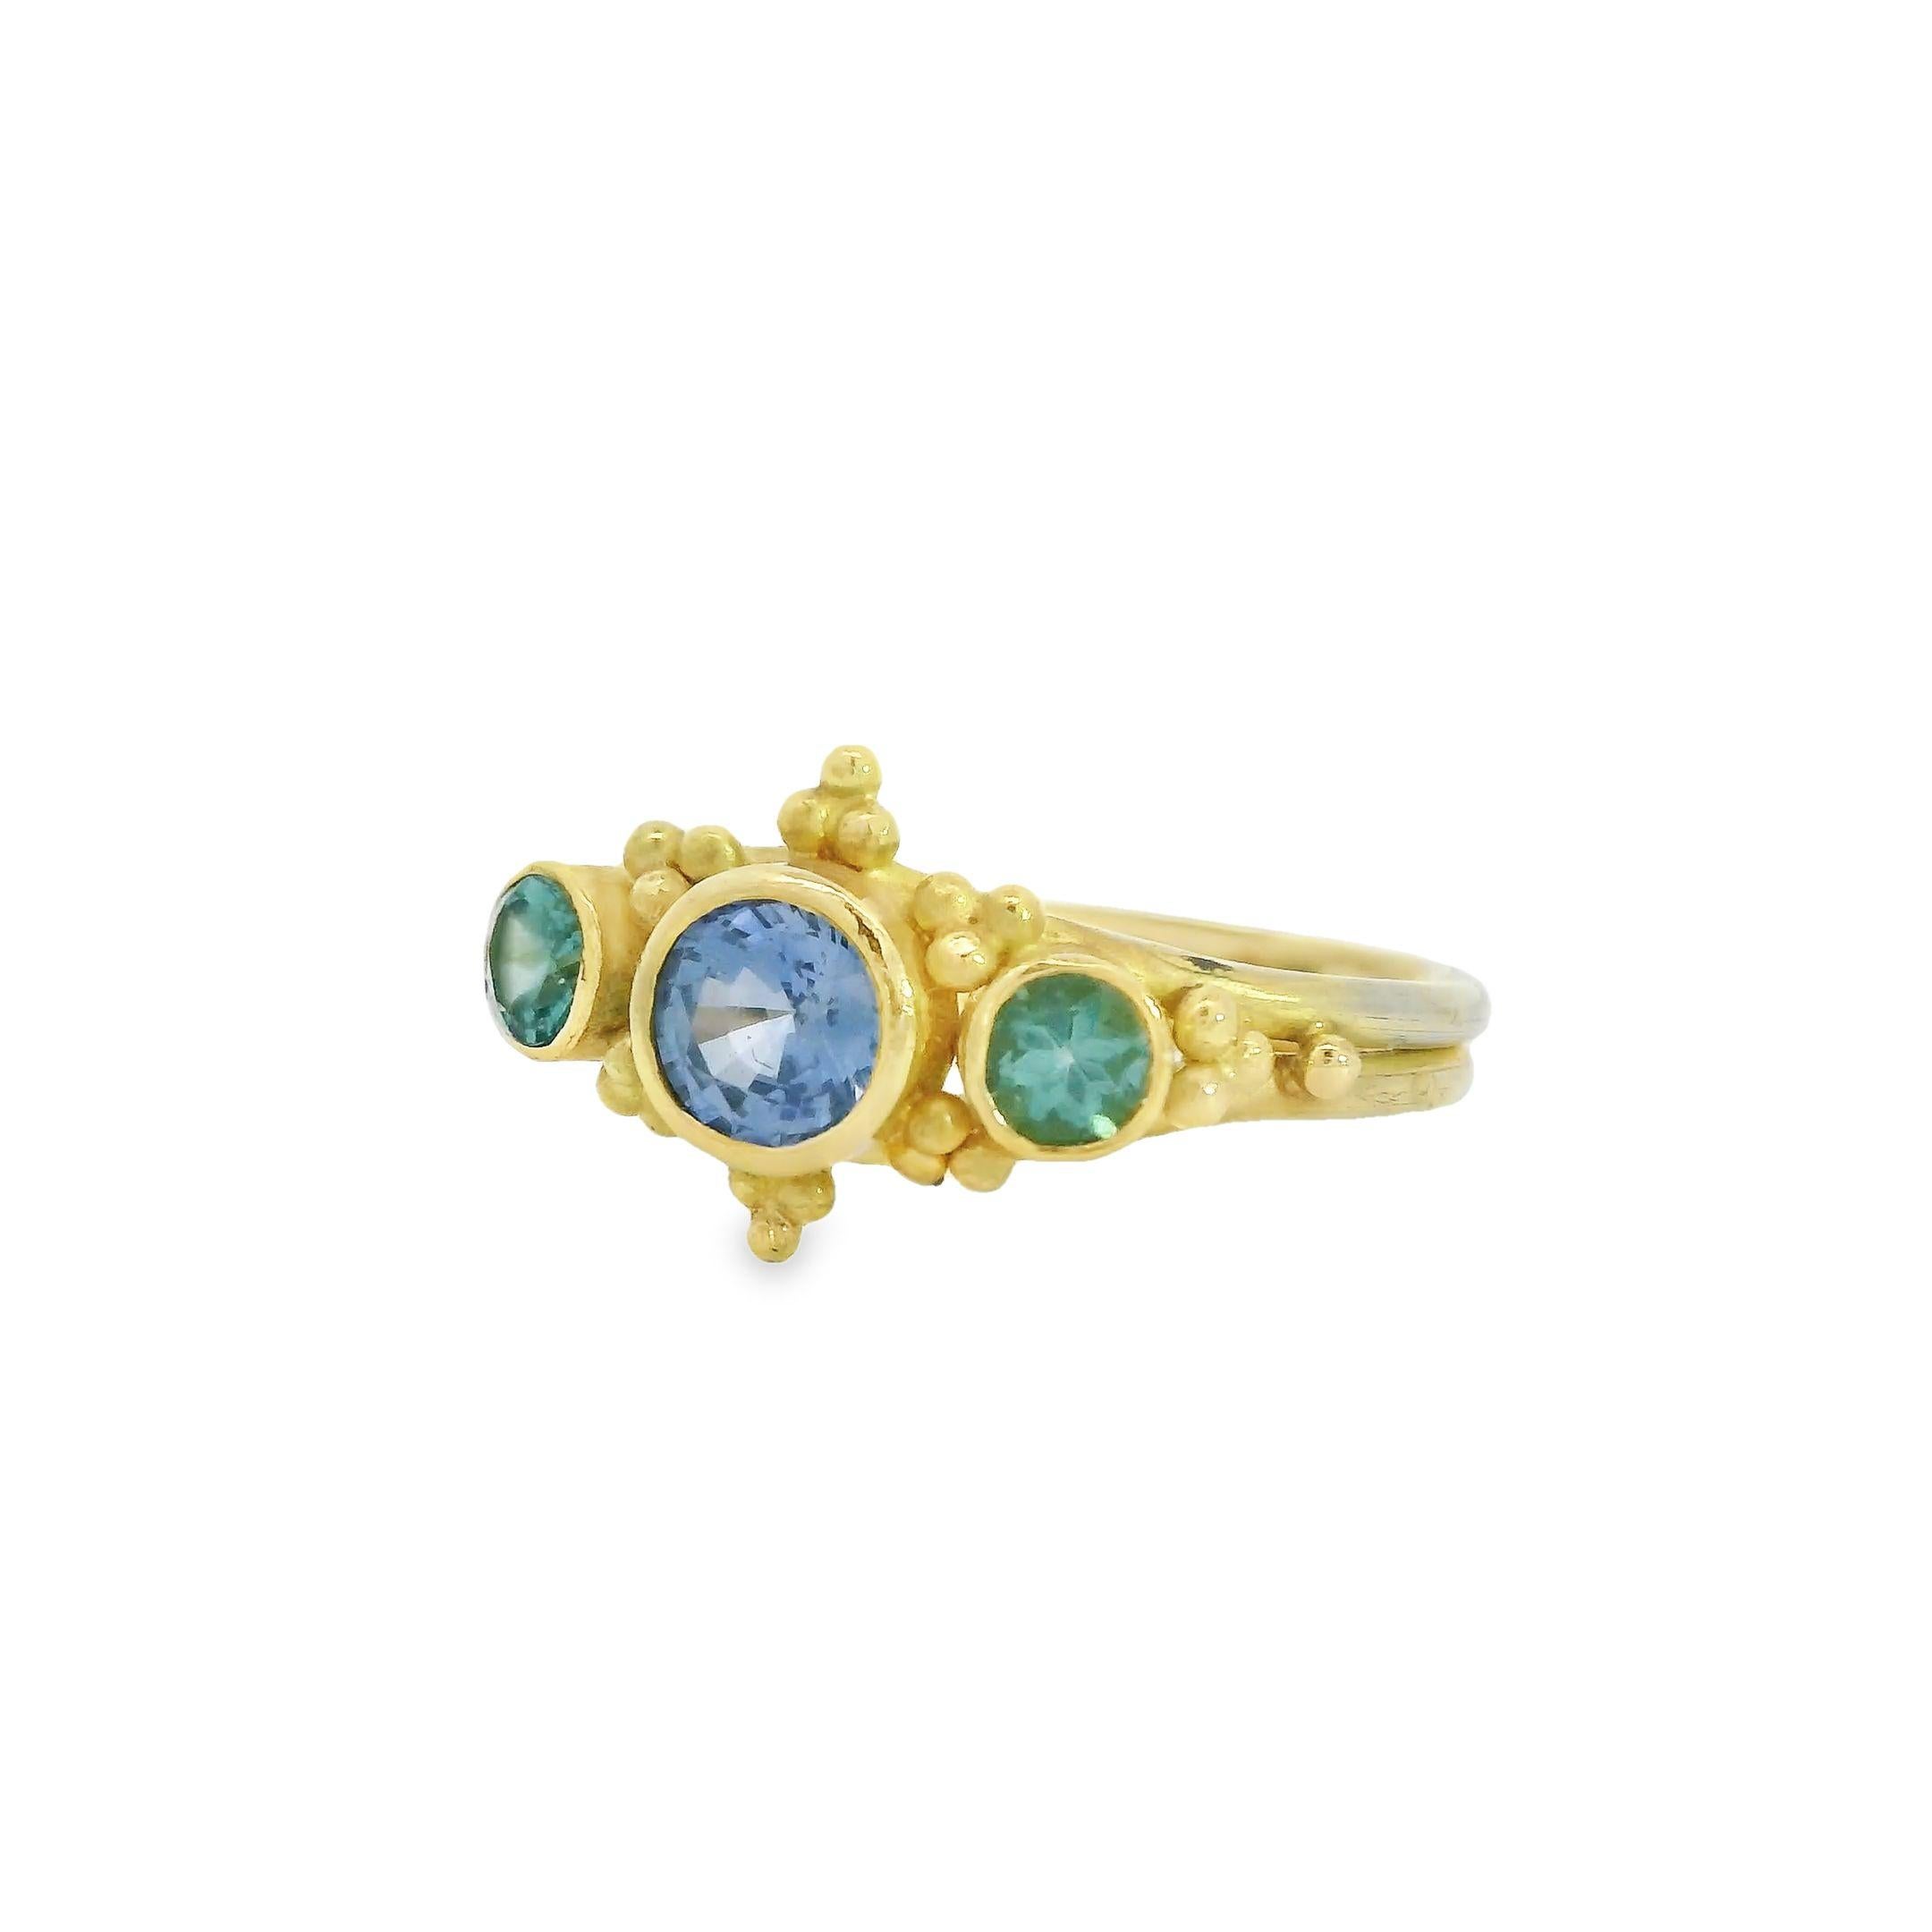 Experience the allure of this handcrafted Periwinkle Sapphire and Tiffany Blue Tourmaline 18k Ring, an exquisite work of art by Lynn Kathyrn Miller, the renowned artisan at Lynn K Designs. This ravishing piece of fine jewelry is a dedication to